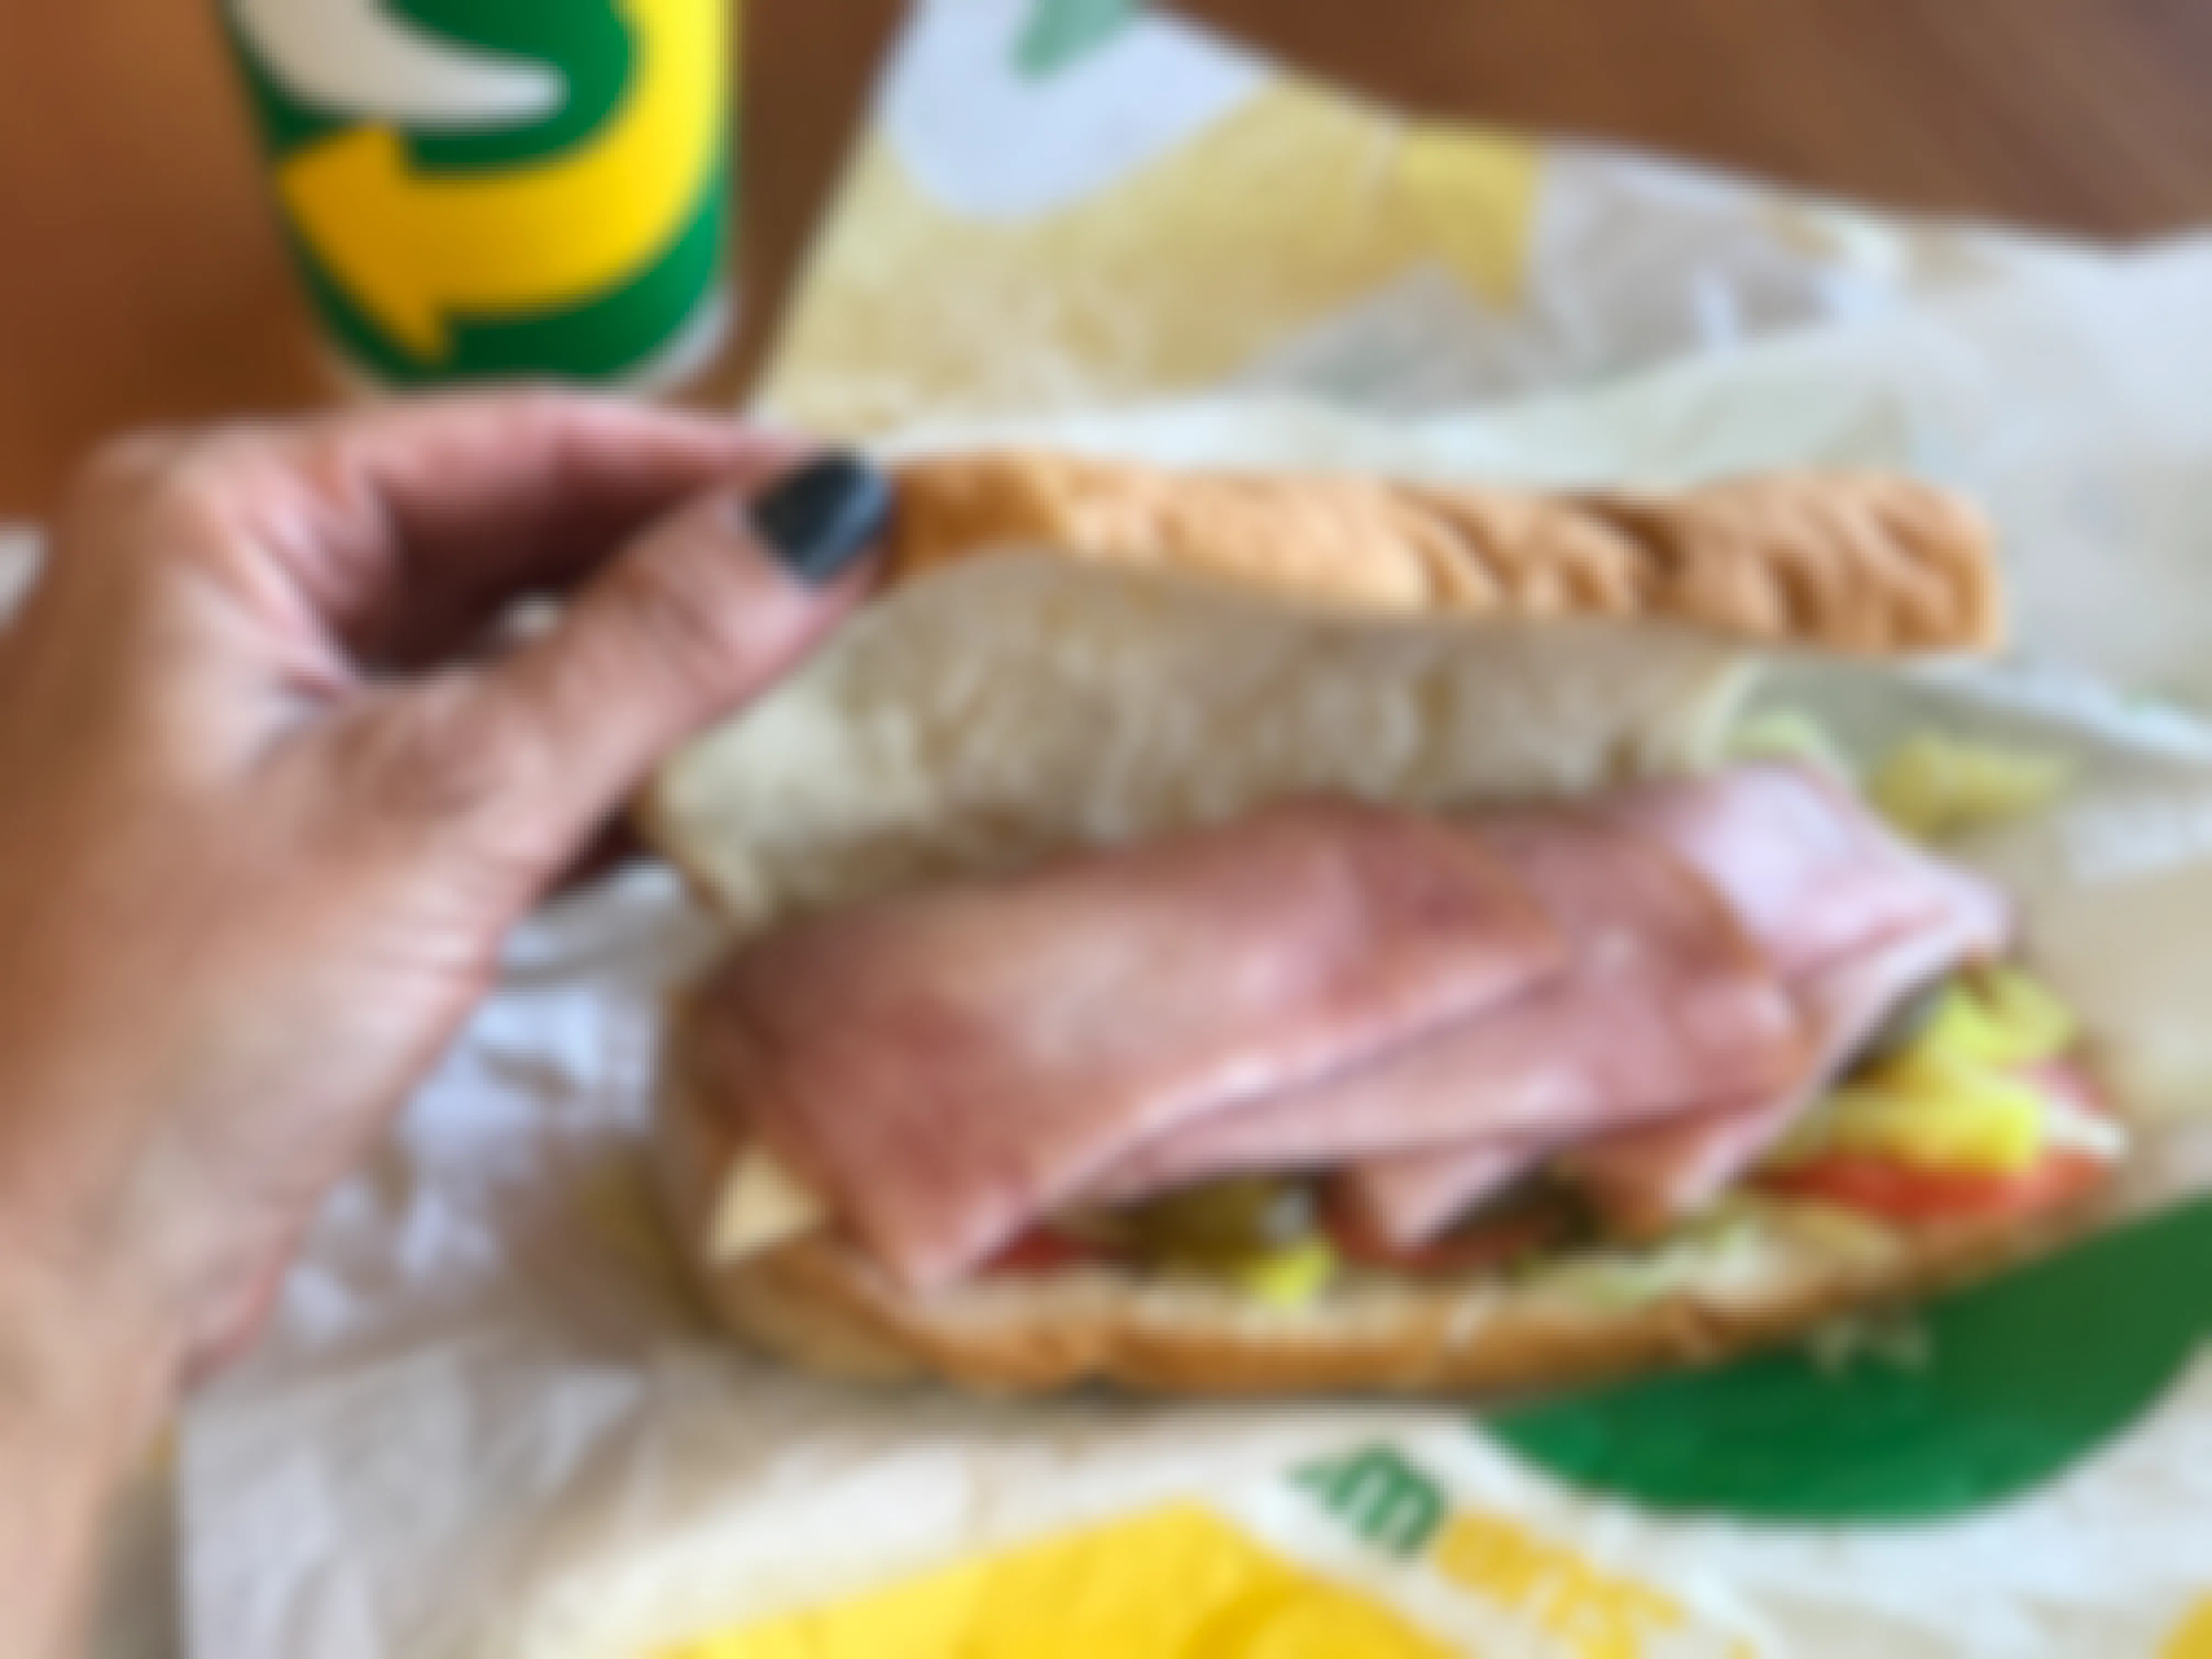 woman's hand opens a subway sub to reveal ingredients